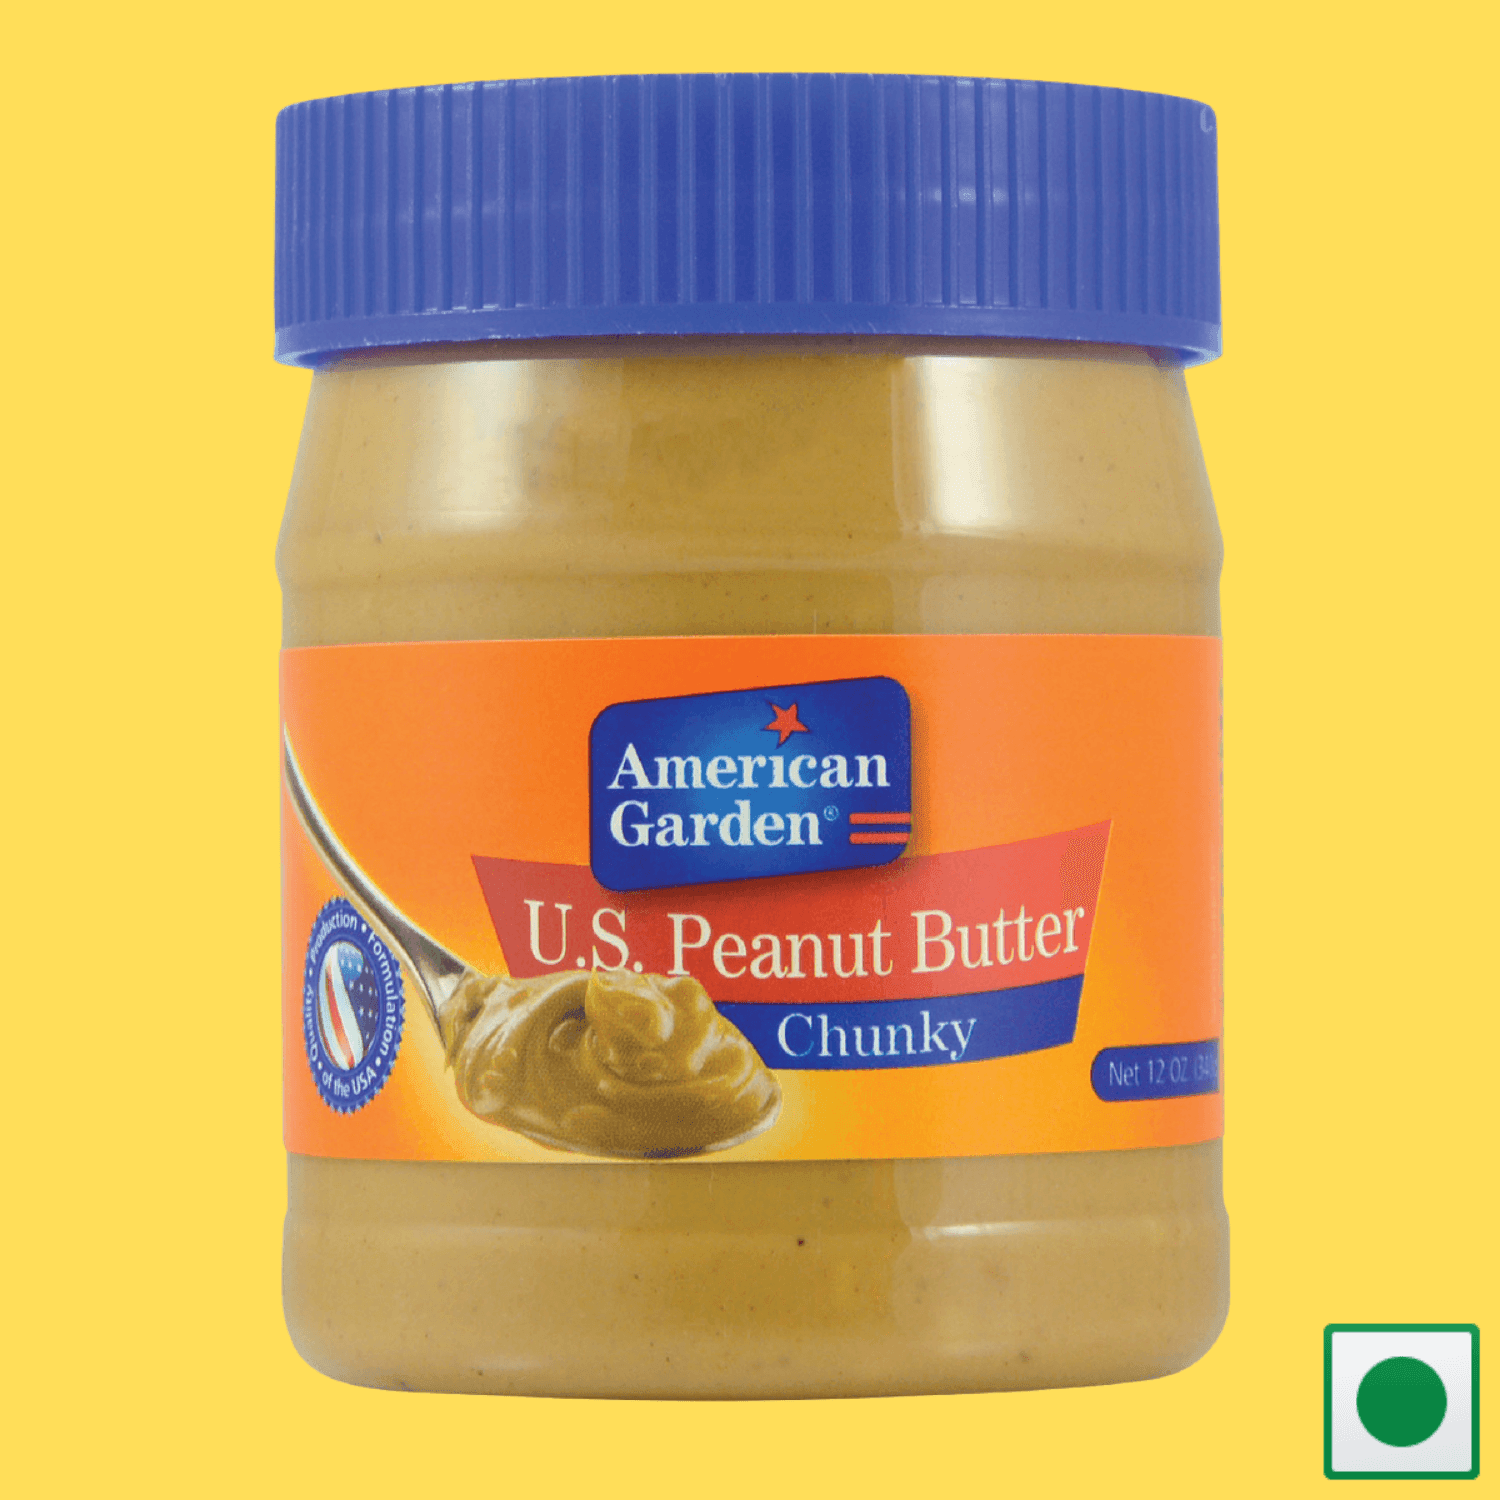 American Garden U.S. Peanut Butter Chunky, 340g (Imported) - Super 7 Mart